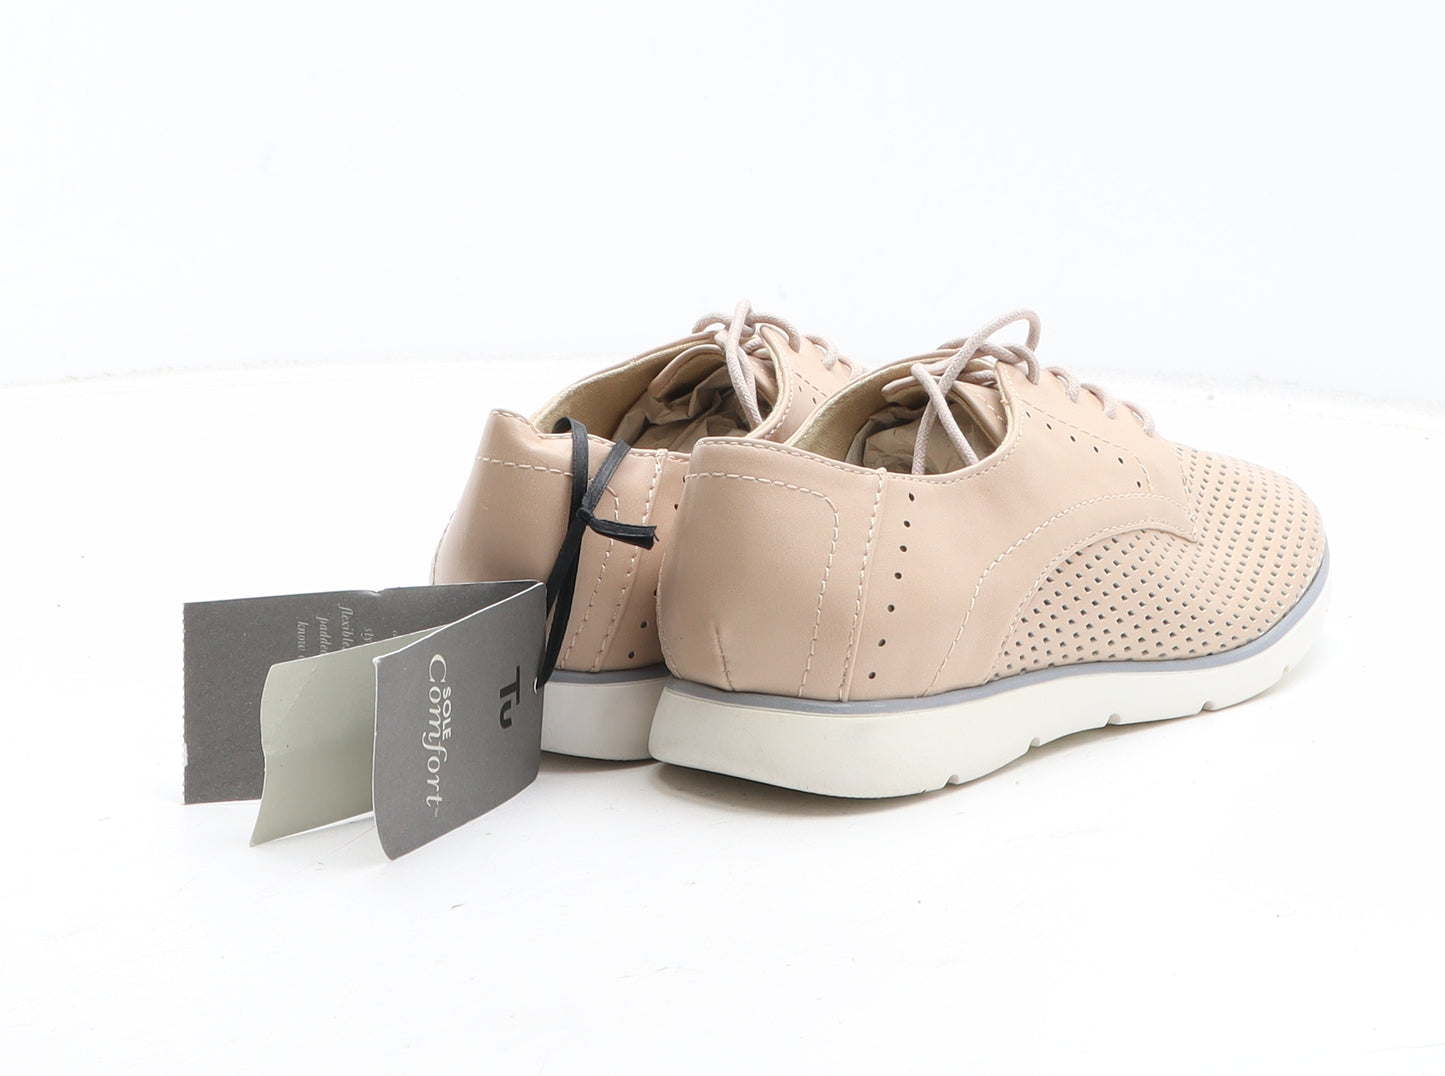 TU Womens Beige Synthetic Trainer Casual UK